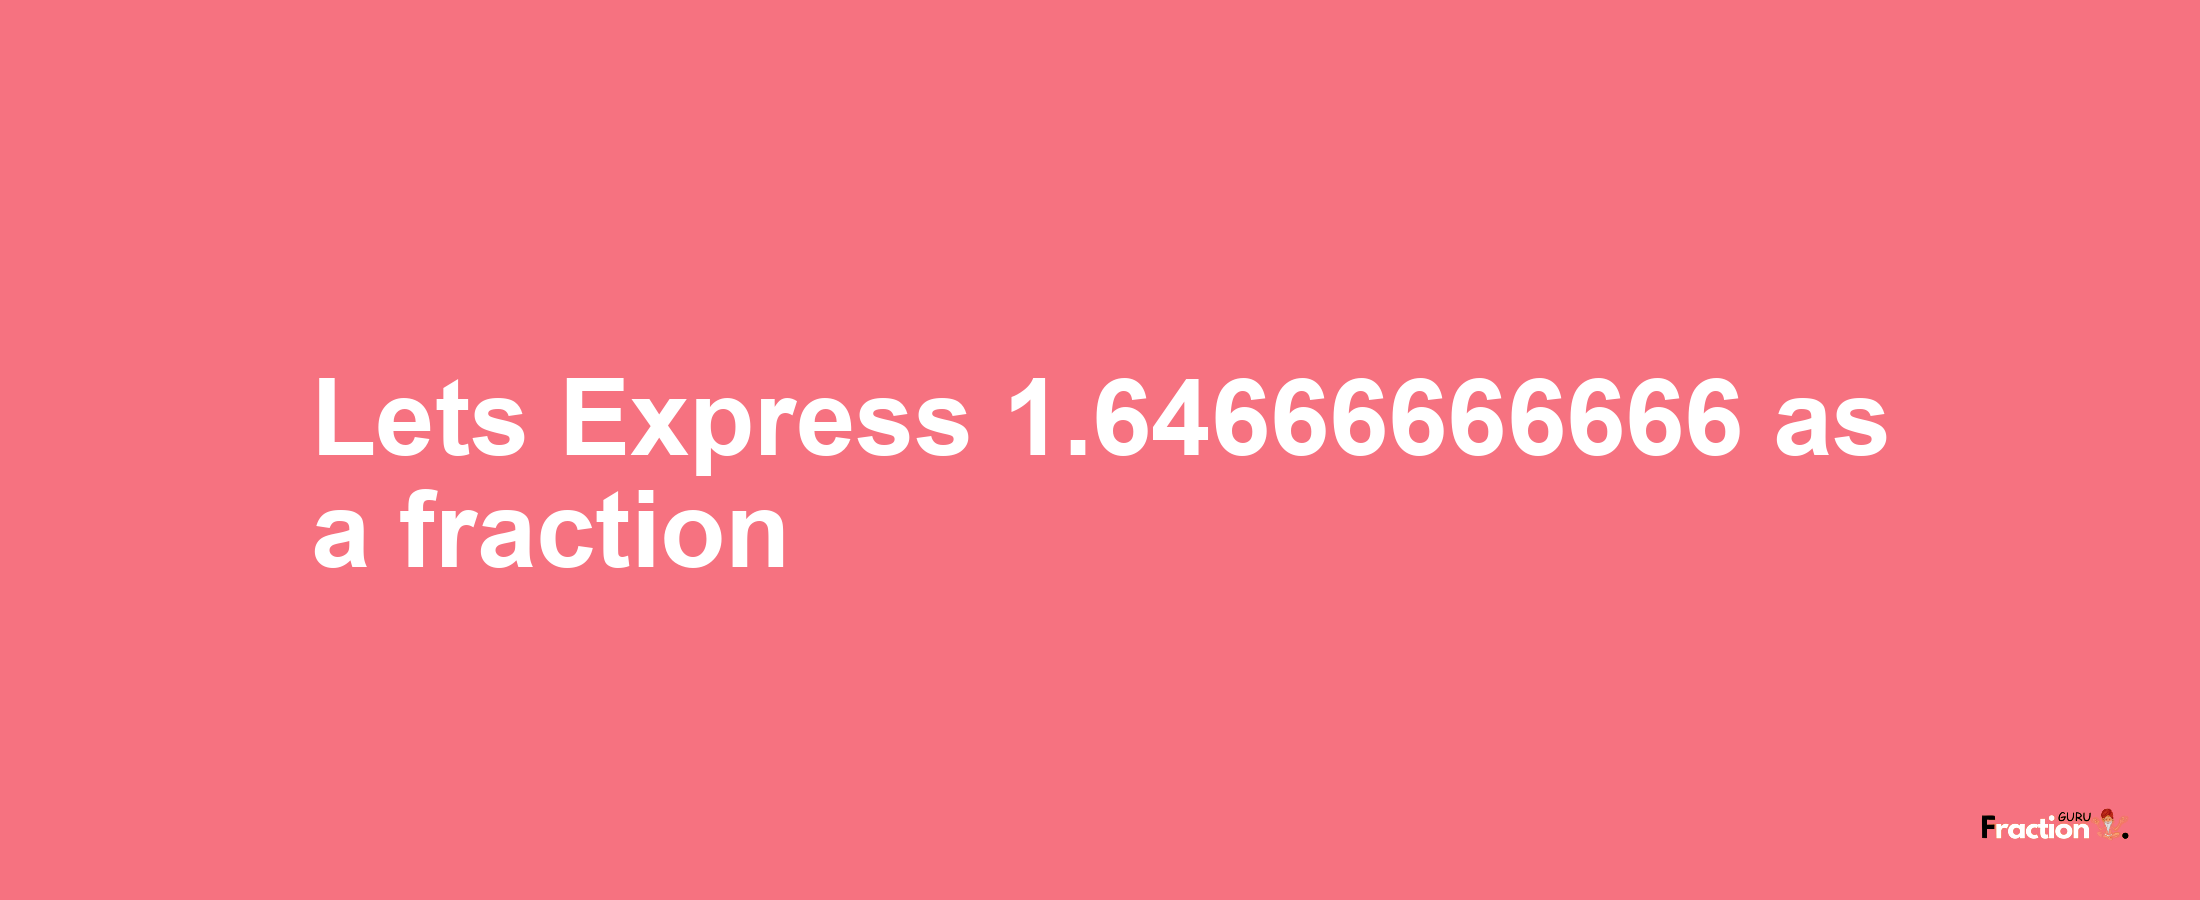 Lets Express 1.64666666666 as afraction